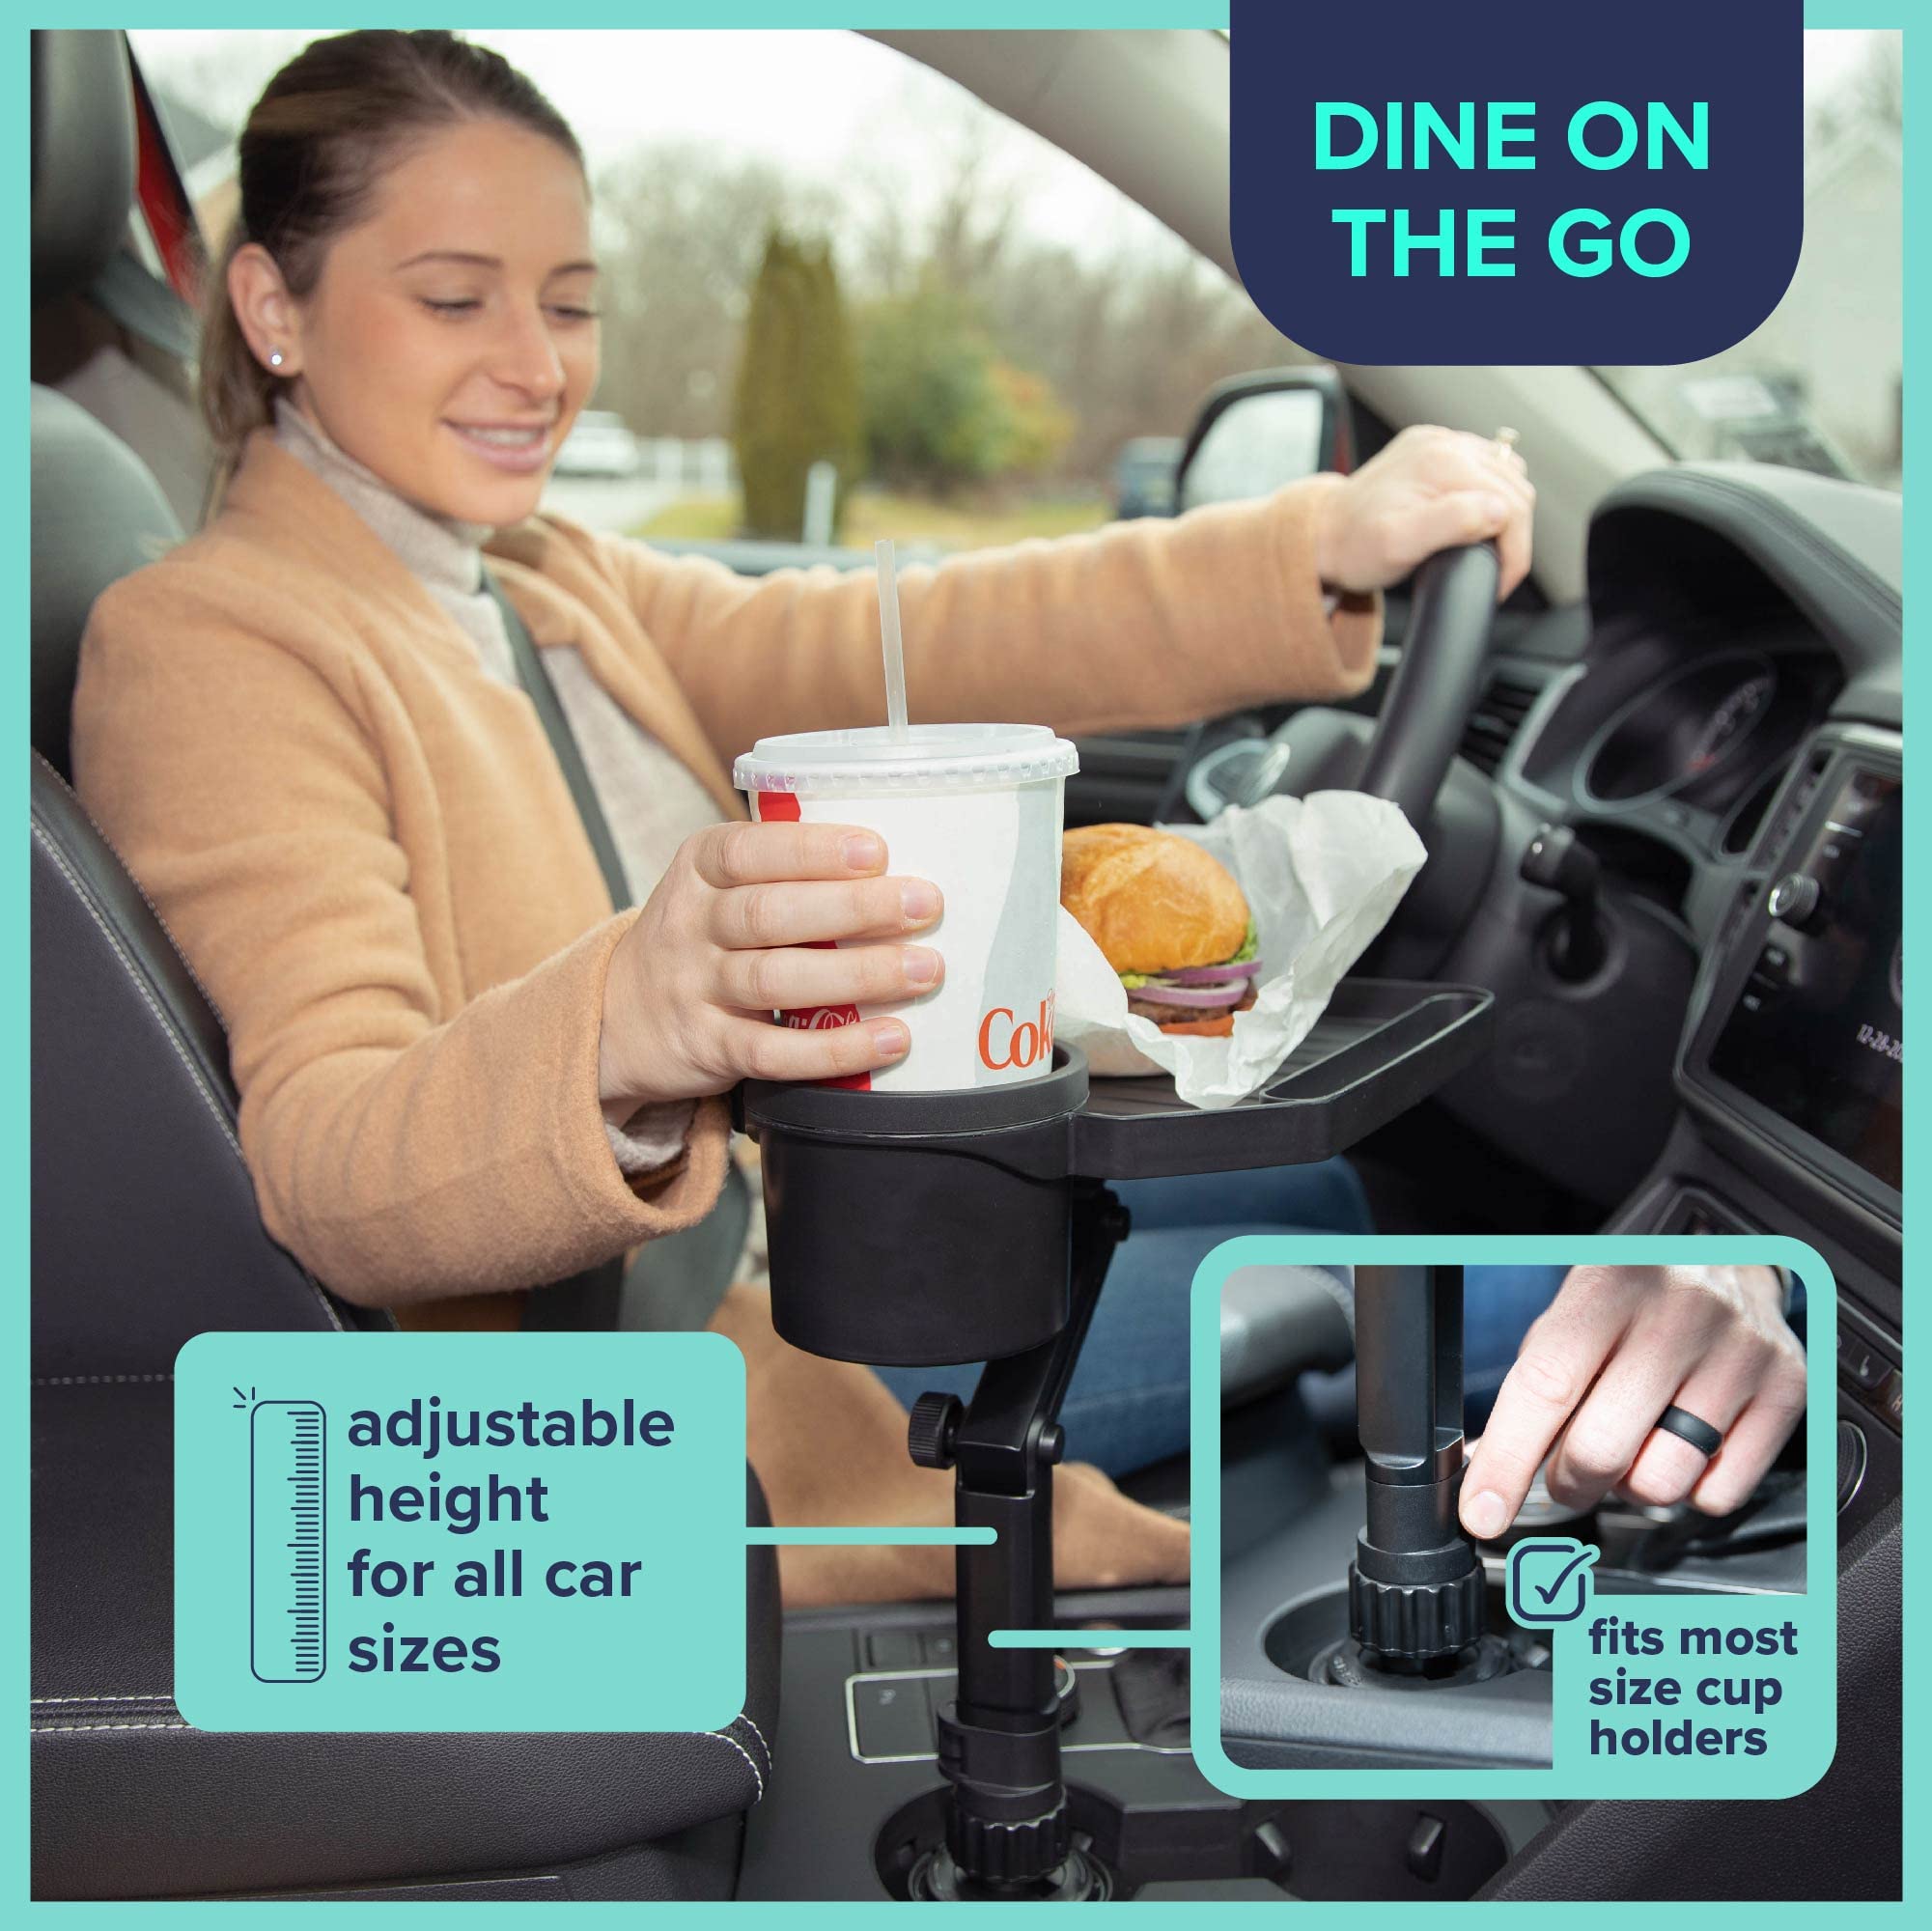 Premium Car Cup Holder Tray - Adjustable Food Tray with Cup Holder & Phone Slot - Premium Car Tray Table with 360� Swivel Arm for Easy Turning from Driver to Passenger Seat - Gift for Men and Women  - Very Good